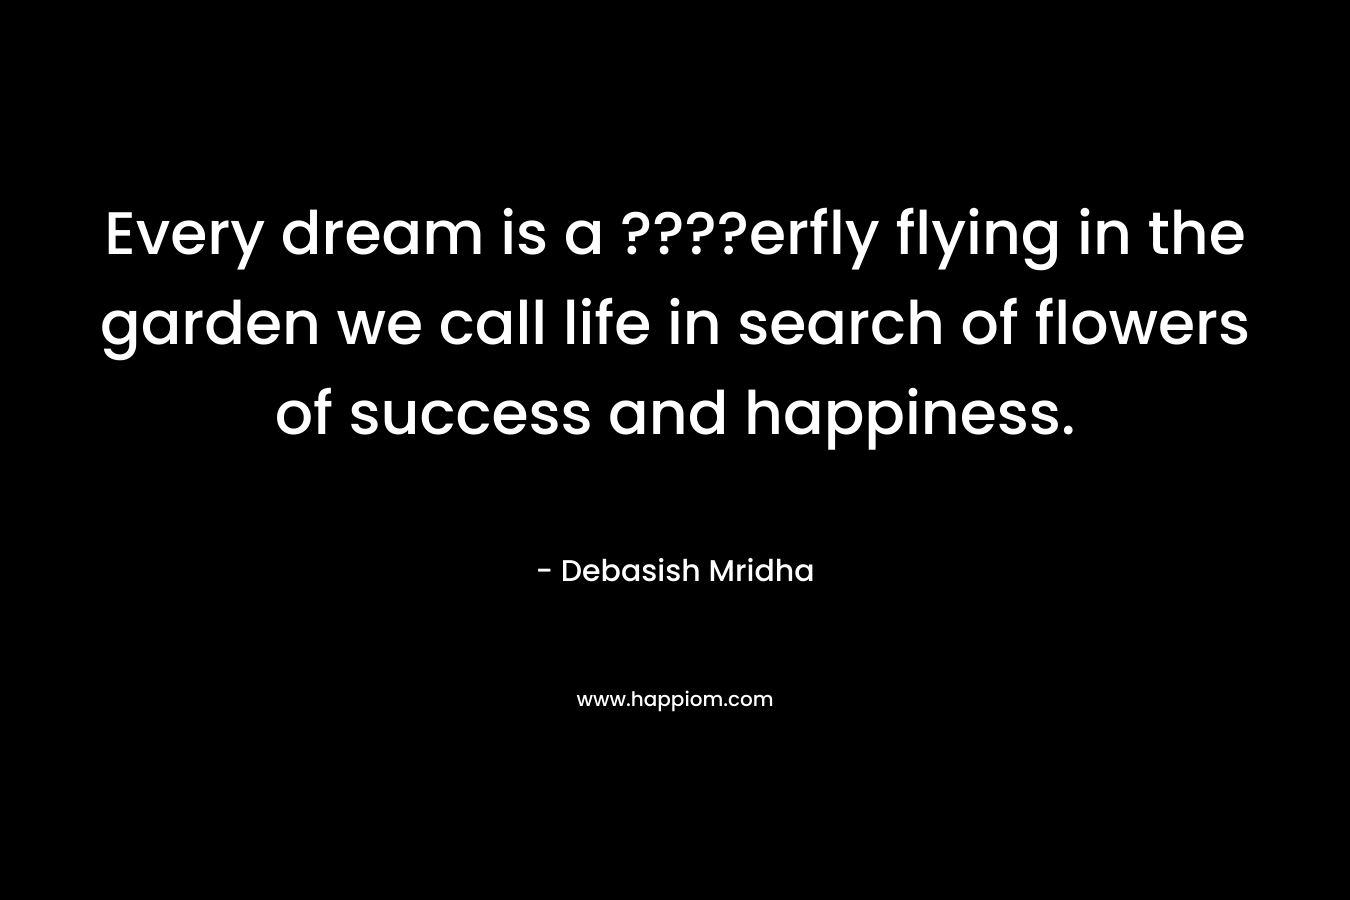 Every dream is a ????erfly flying in the garden we call life in search of flowers of success and happiness.